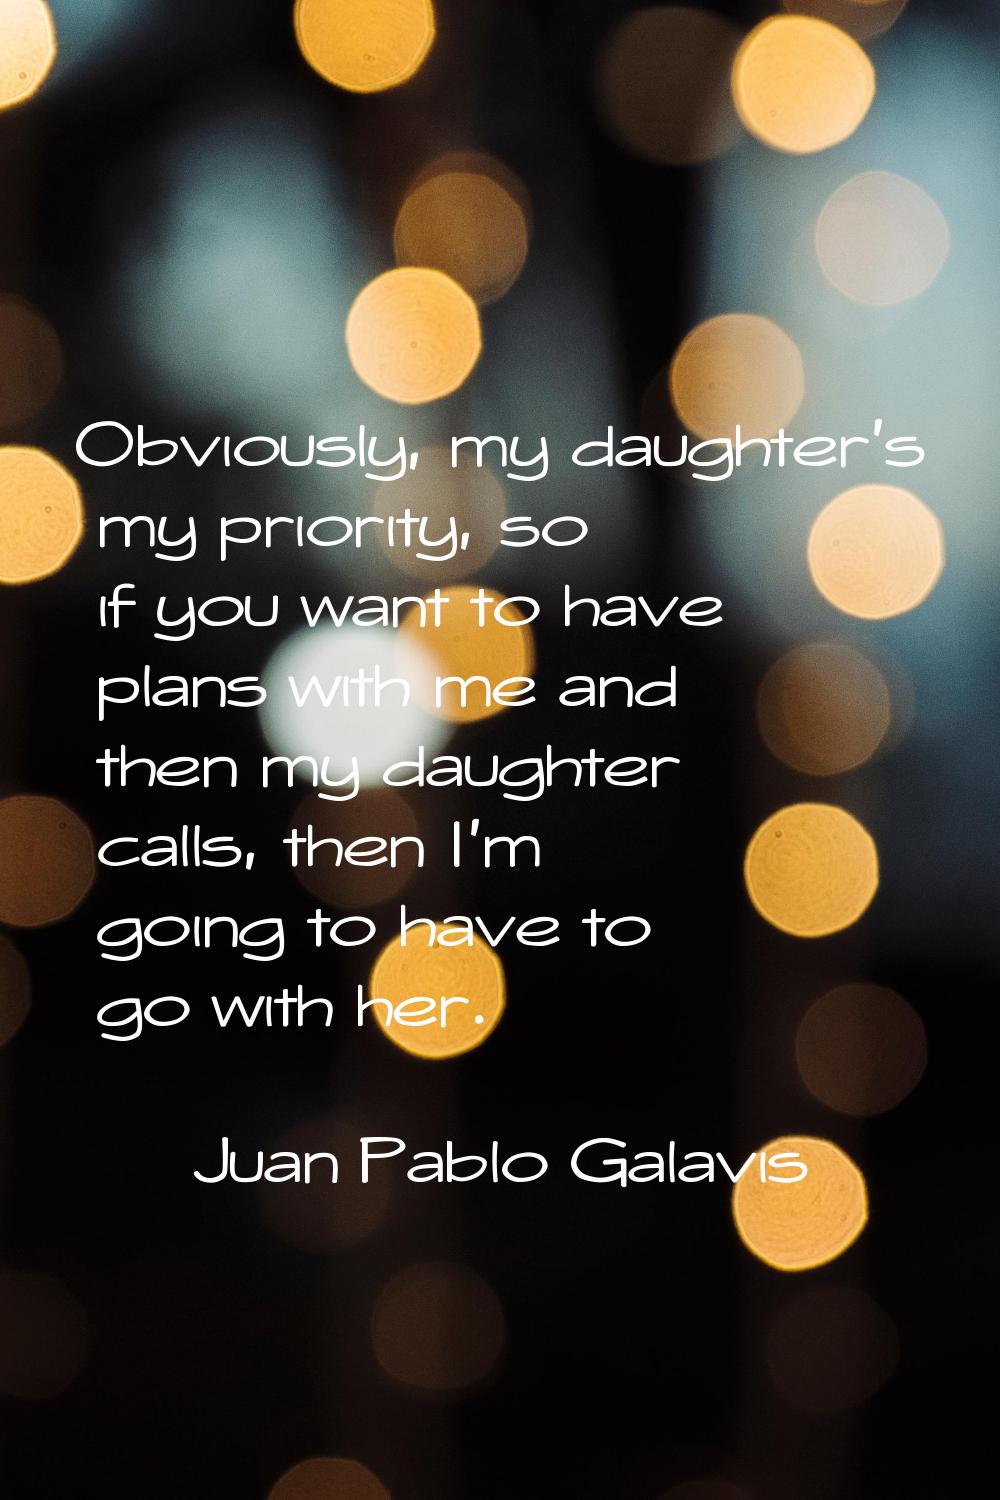 Obviously, my daughter's my priority, so if you want to have plans with me and then my daughter cal